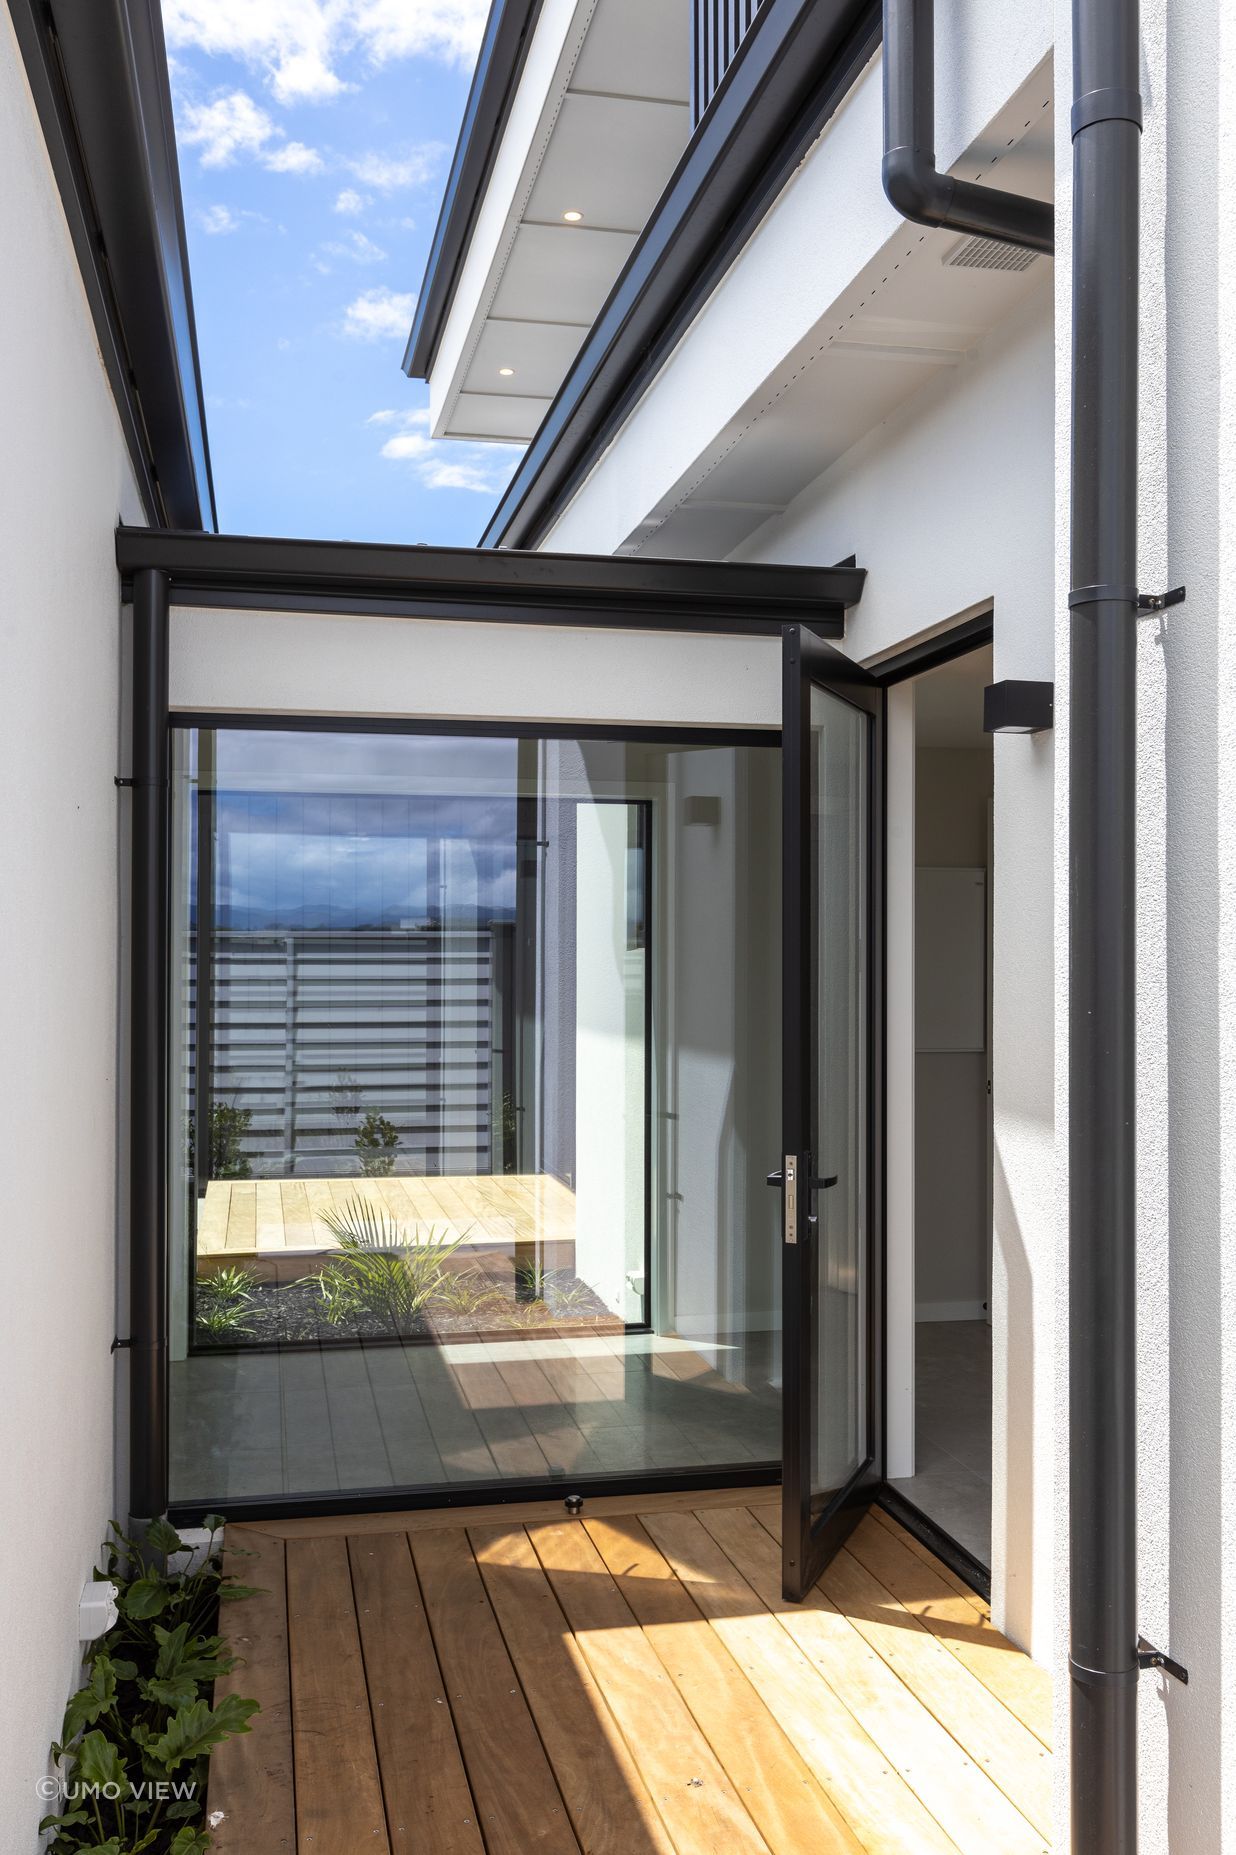 The view is captured from every possible area of the home with extensive glazing.